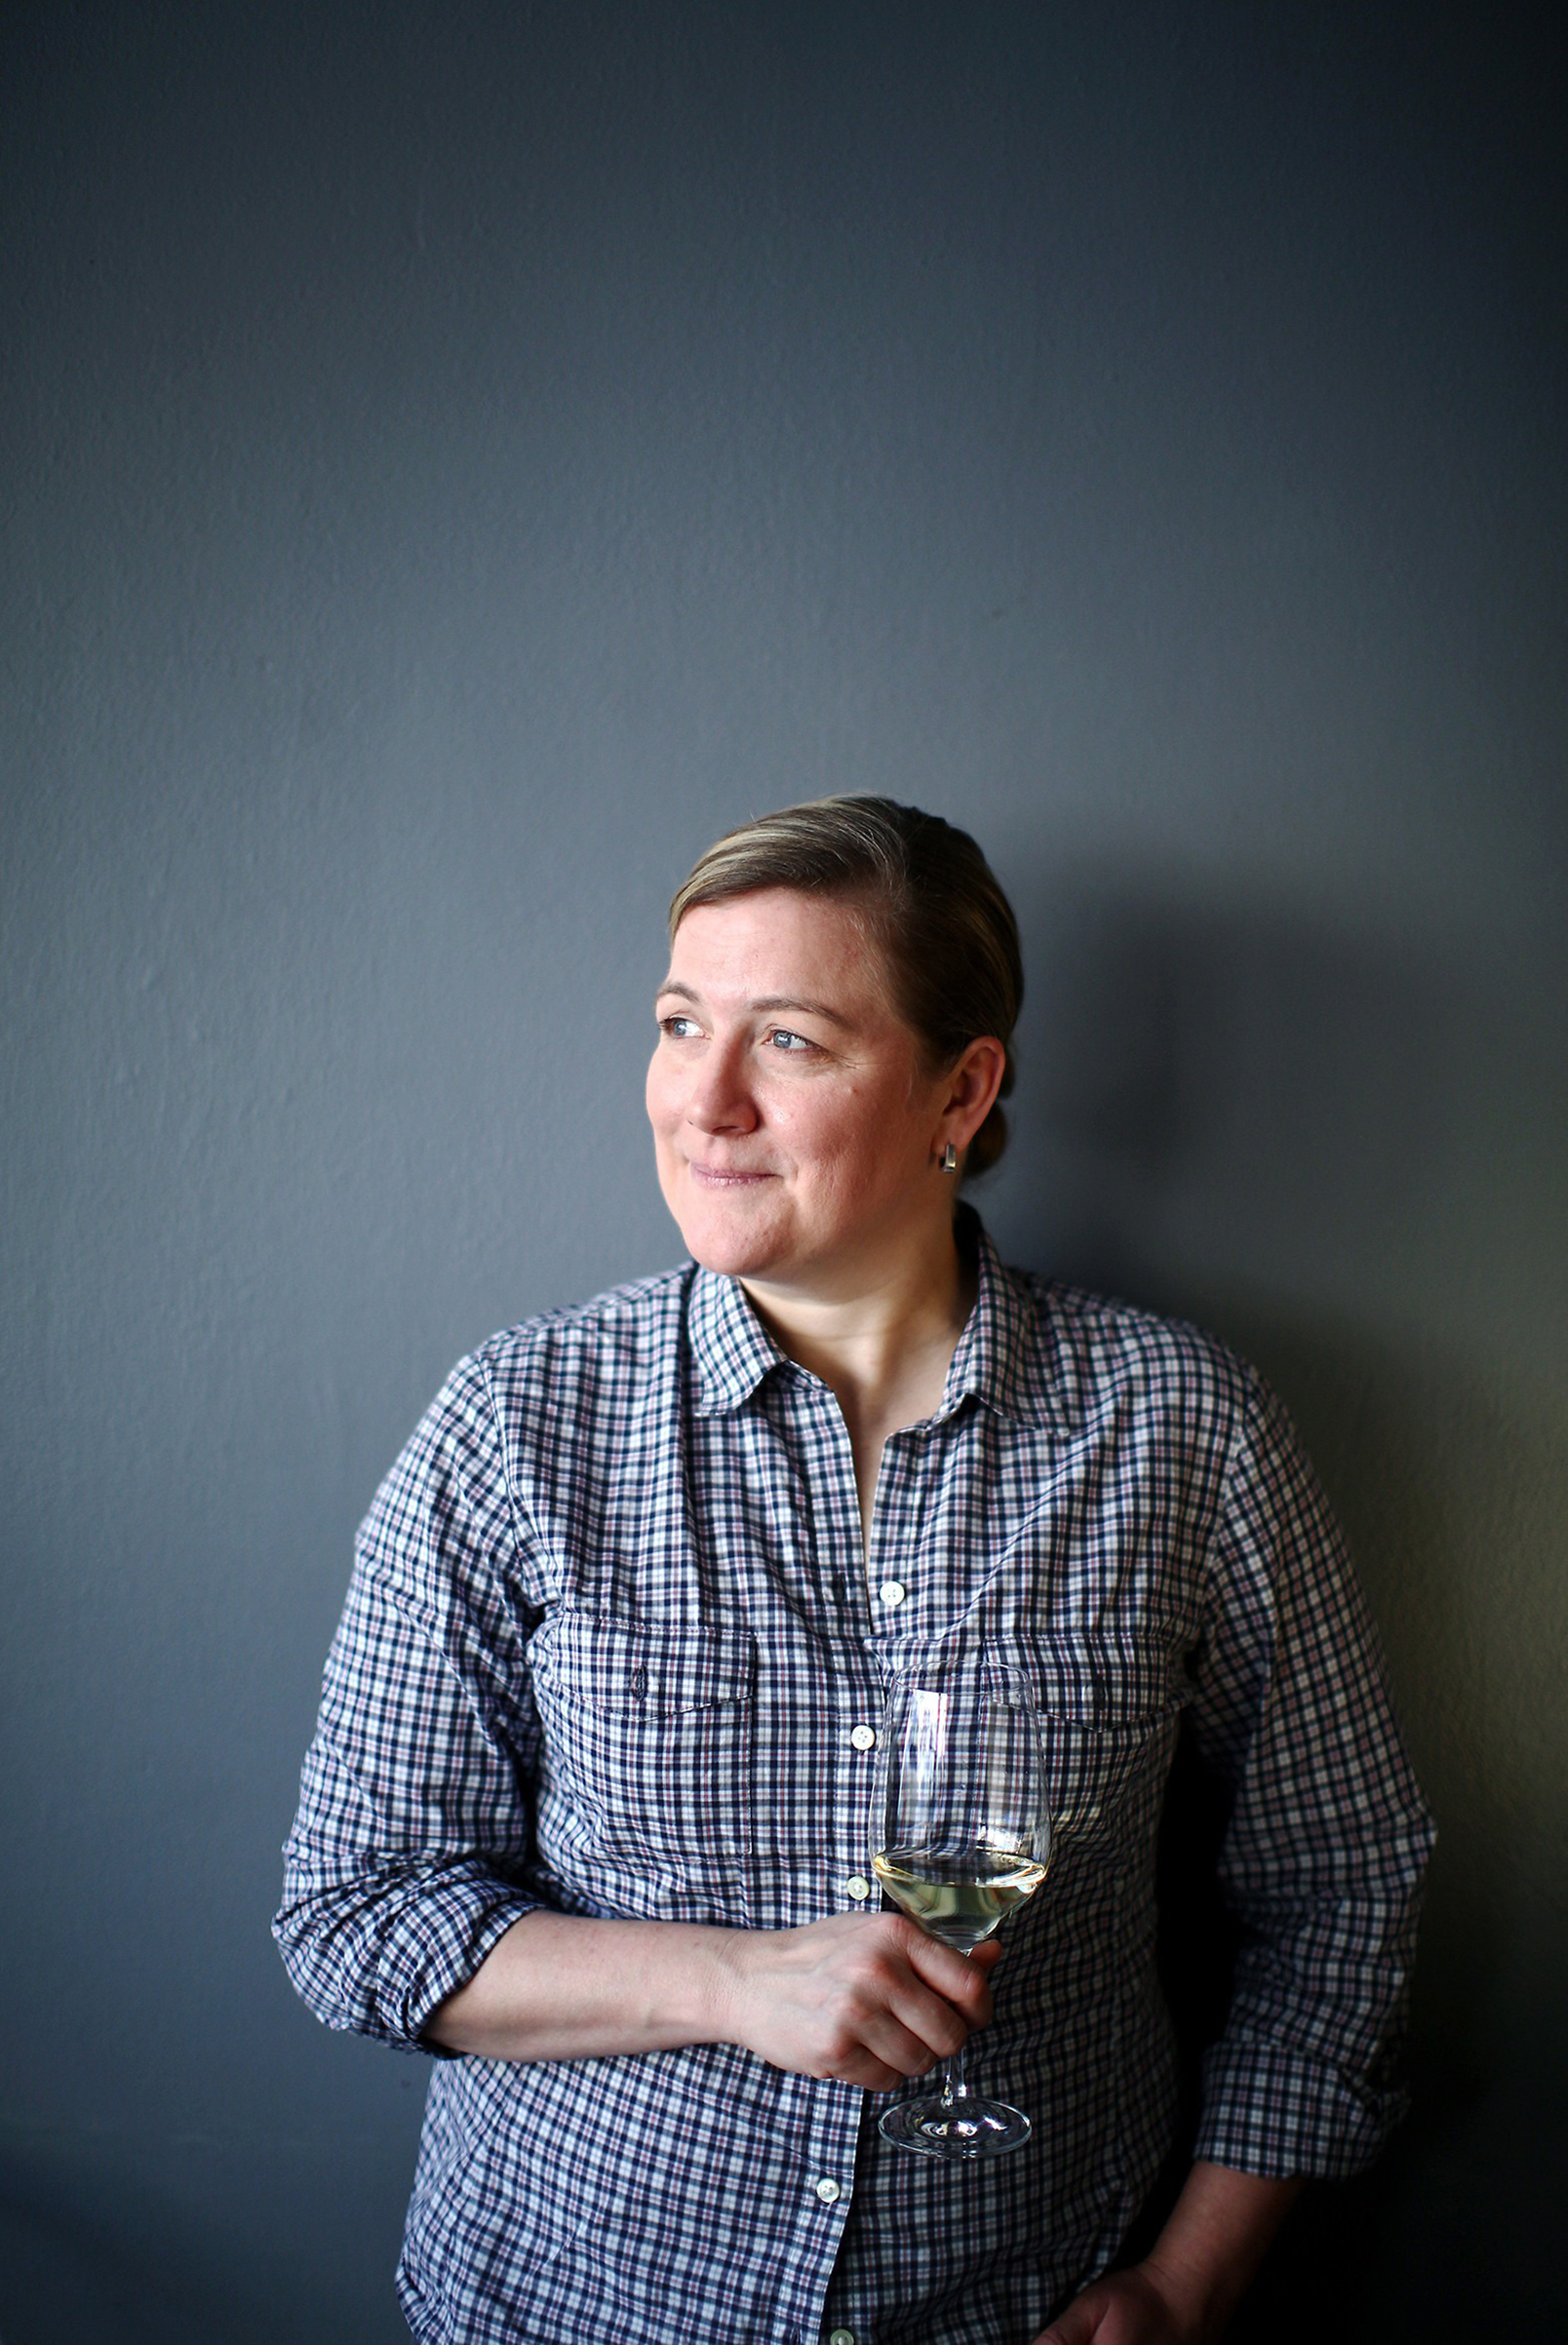 Chef Ashley Christensen, above, opened Poole’s Diner in Raleigh in 2007